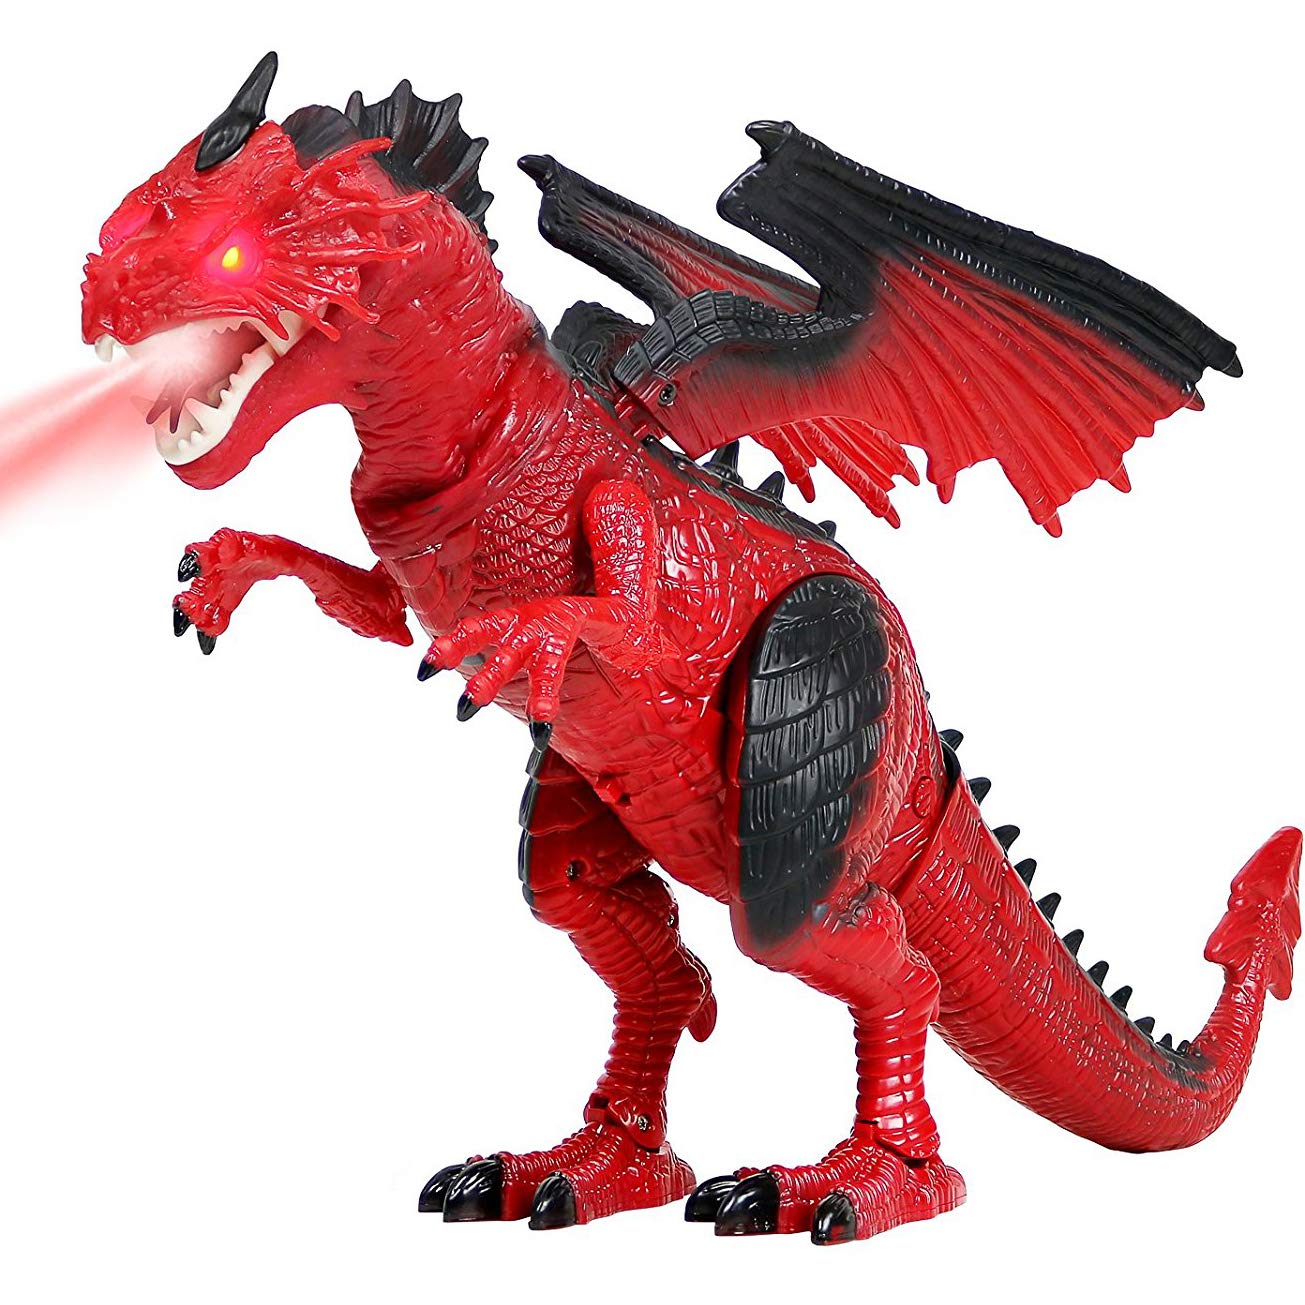 Dino Planet Remote Control R/C Walking Dinosaur Toy with Shaking Head, Light Up Eyes and Sounds (B/O Dragon)